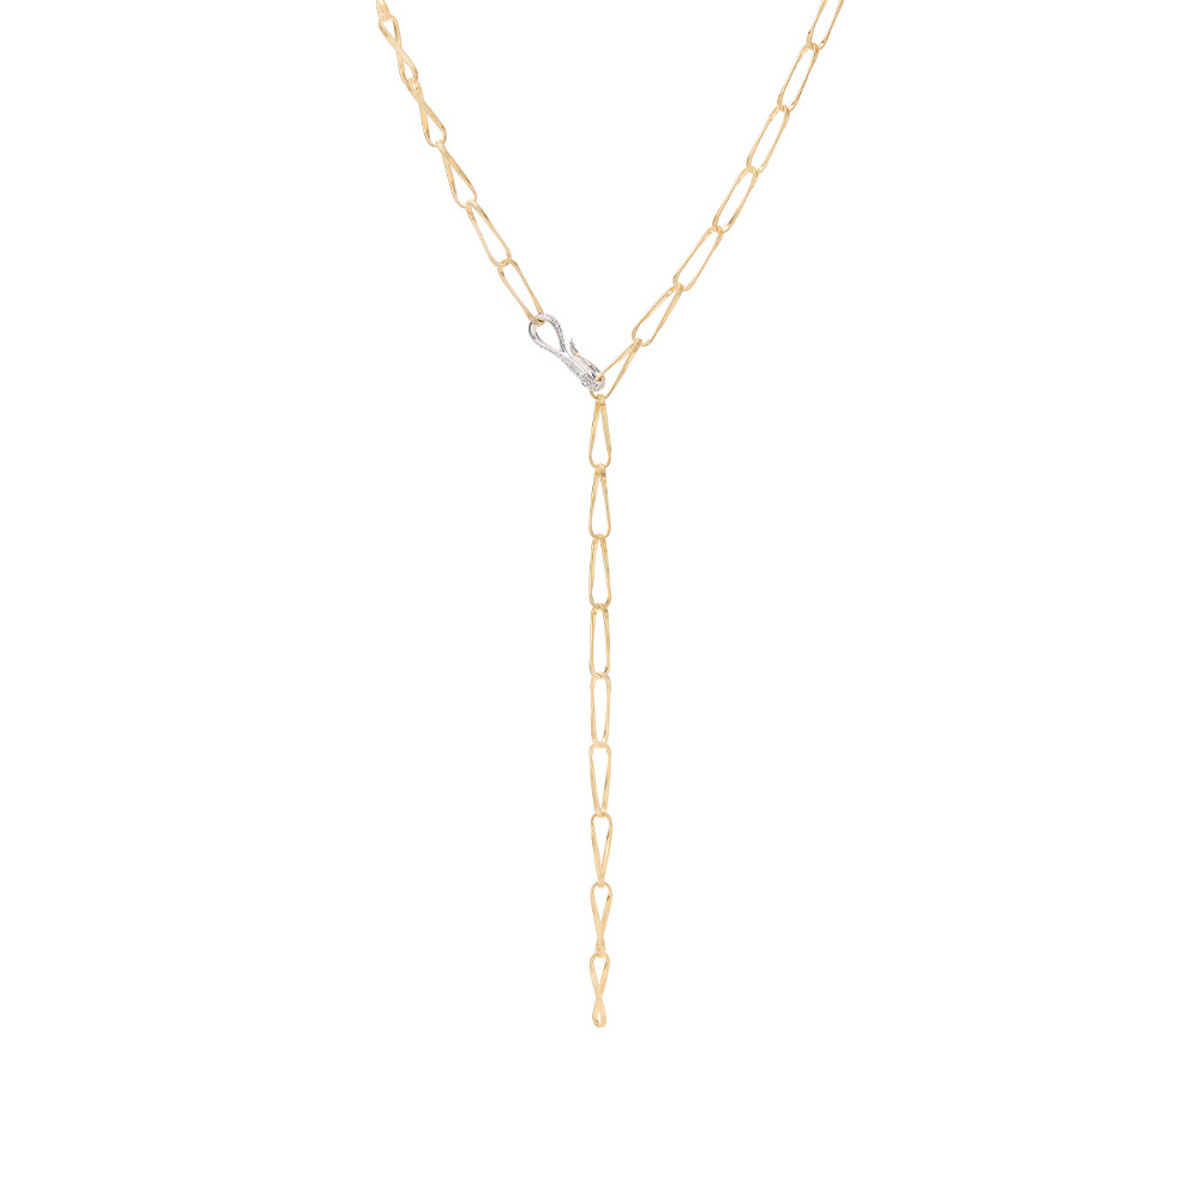 Marco Bicego Marrakech Collection 18K Yellow Gold  Large Onde Necklace-54413 Product Image